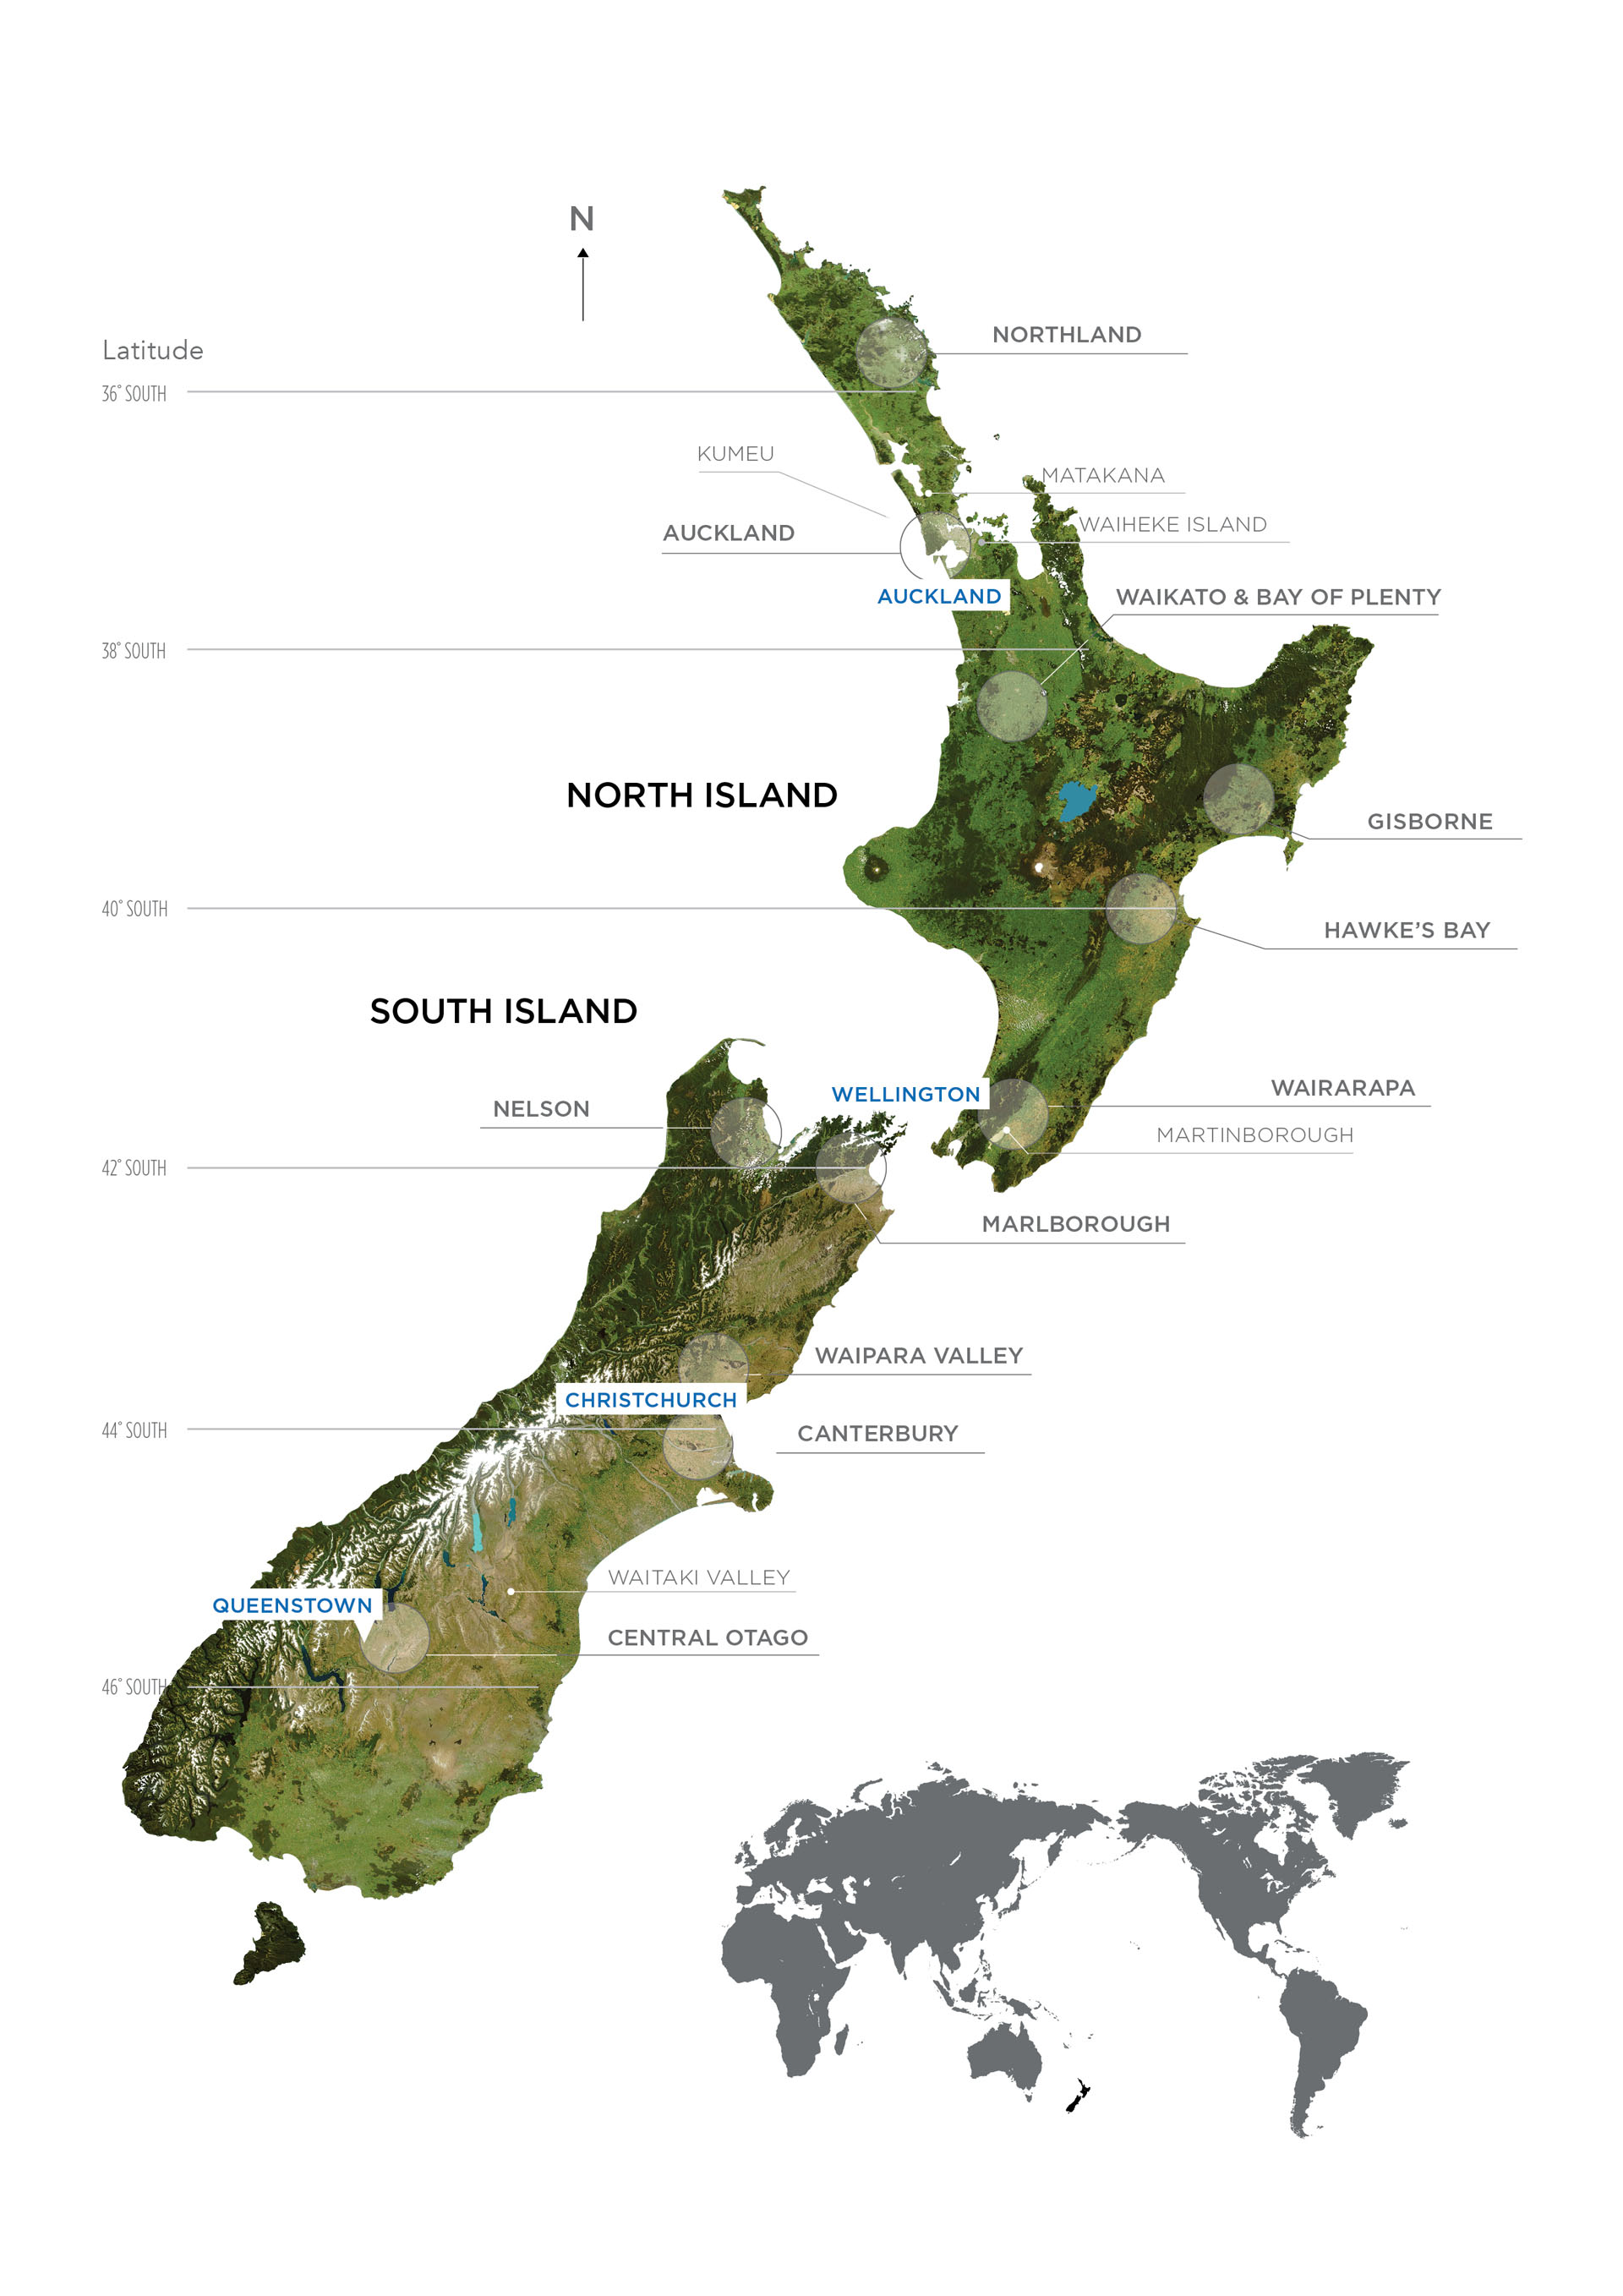 Although smaller than California, New Zealand now has 10 main wine regions, most of them near the coast except for Central Otago.